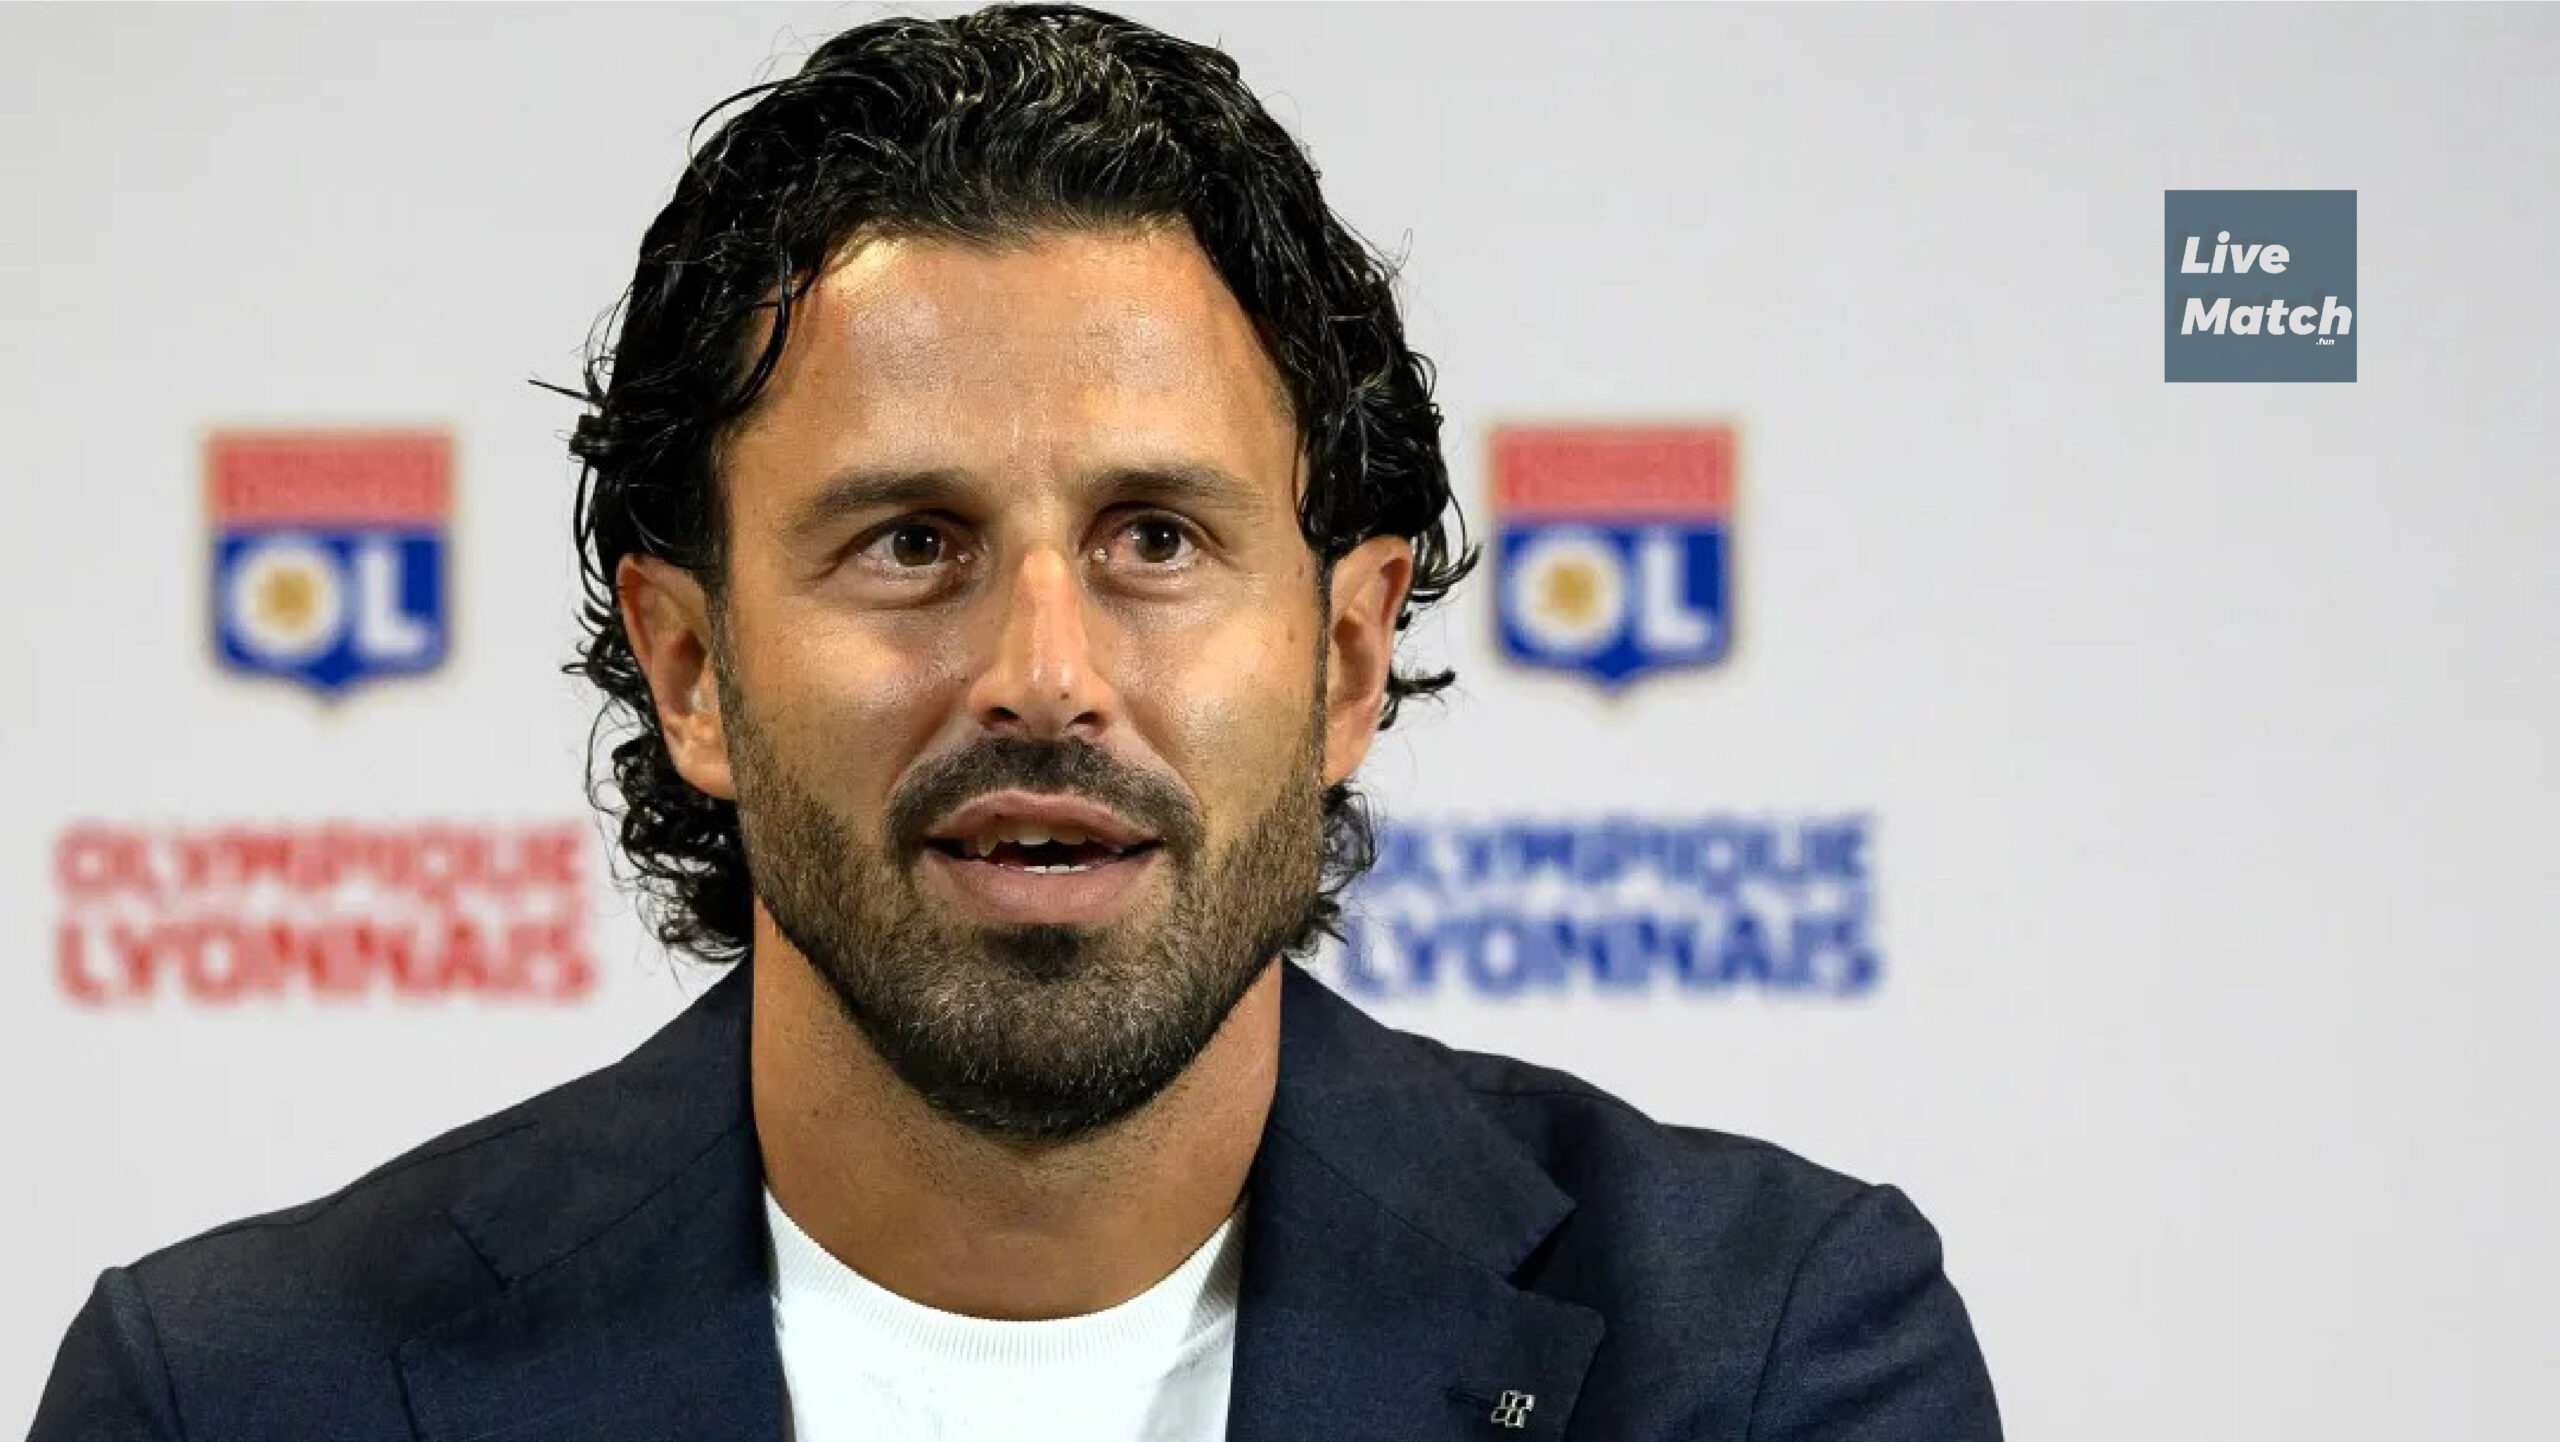 Olympique de Marseille vs. Olympique Lyon has been postponed due to a bus attack that left Fabio Grosso with serious injuries.